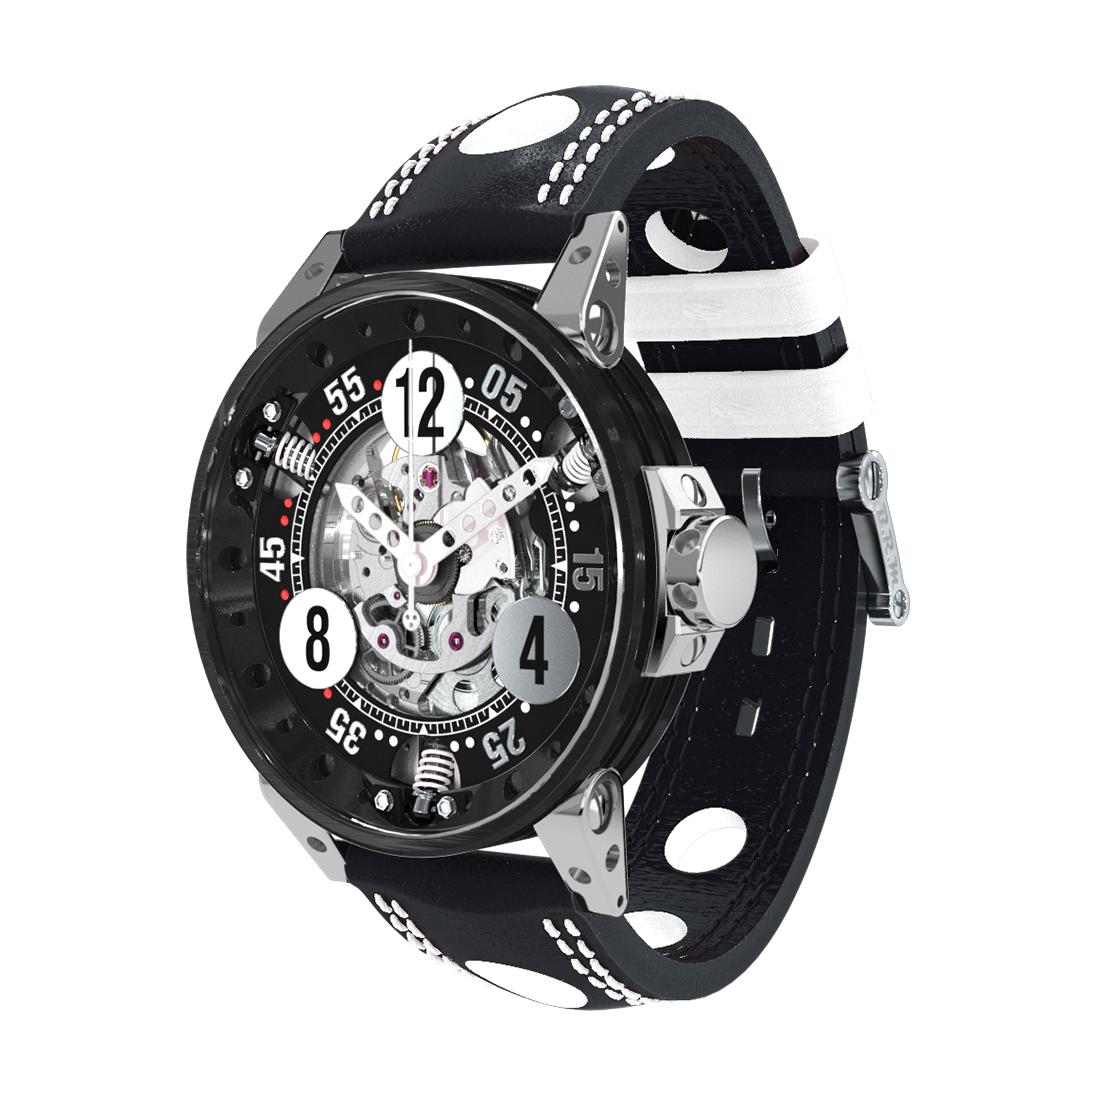 BRM Stainless Steel Black Automatic Racing Watch Black Leather Strap For Sale